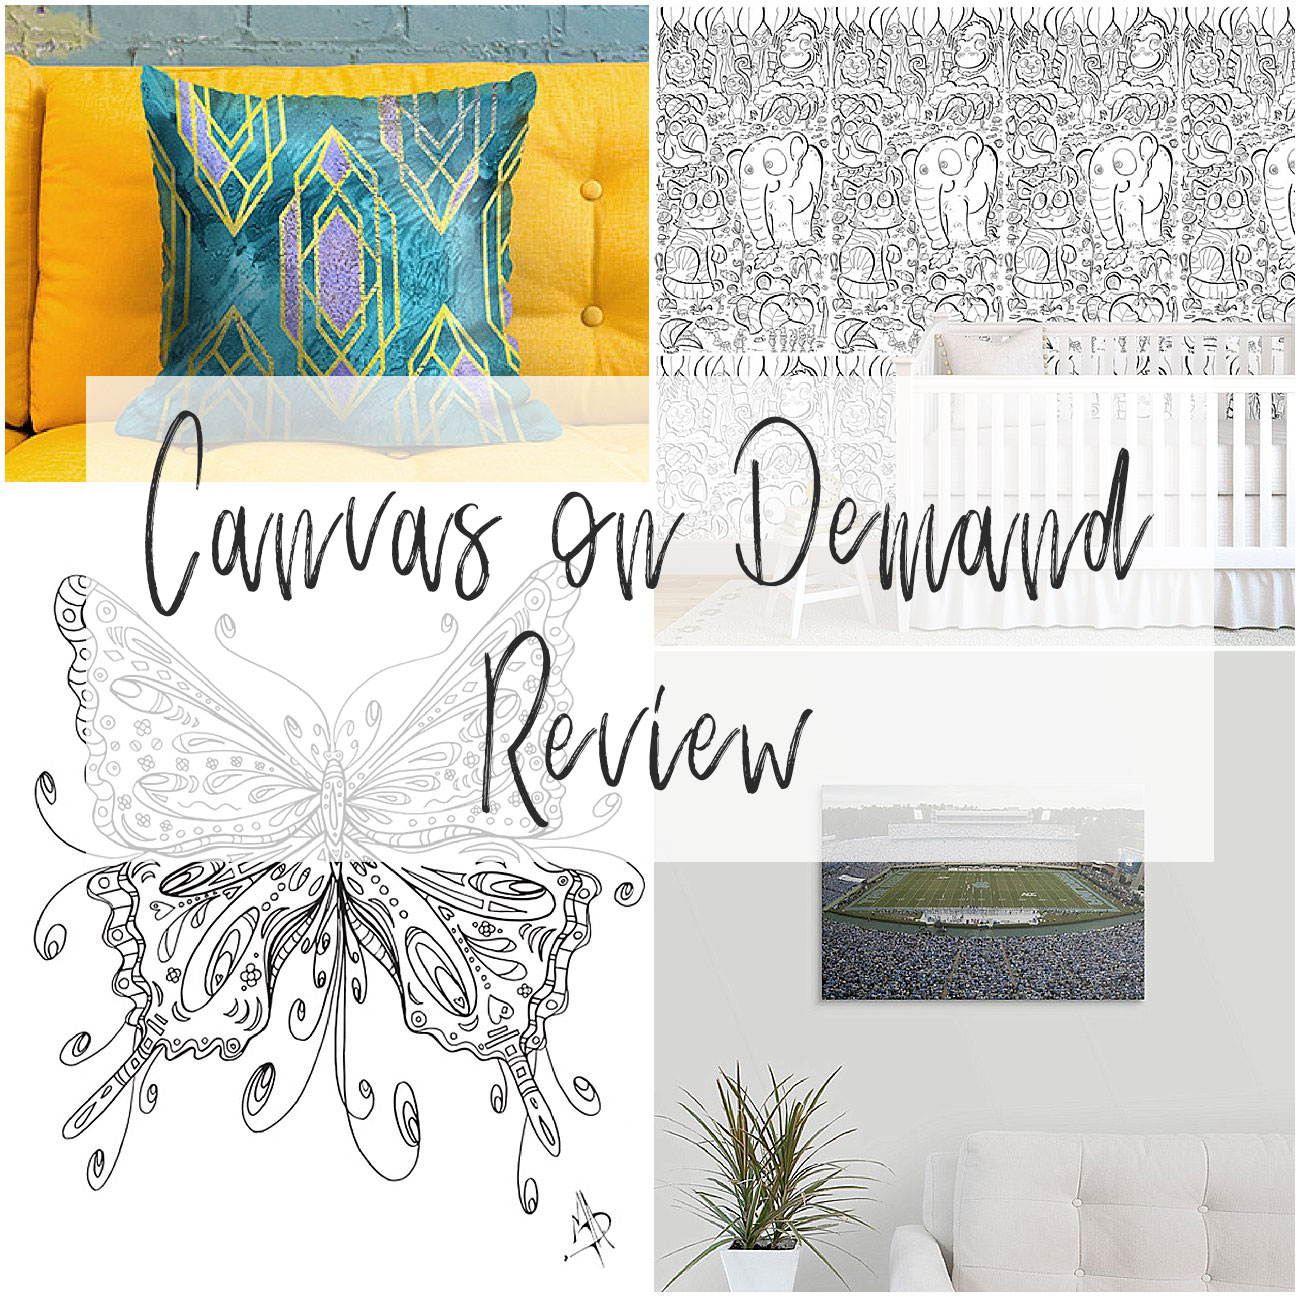 Best Custom Gifts and Photo-to-Canvas Prints | Canvas on Demand Review - Best Custom Gifts and Photo-to-Canvas Prints | Canvas on Demand Review by North Carolina lifestyle blogger Still Being Molly